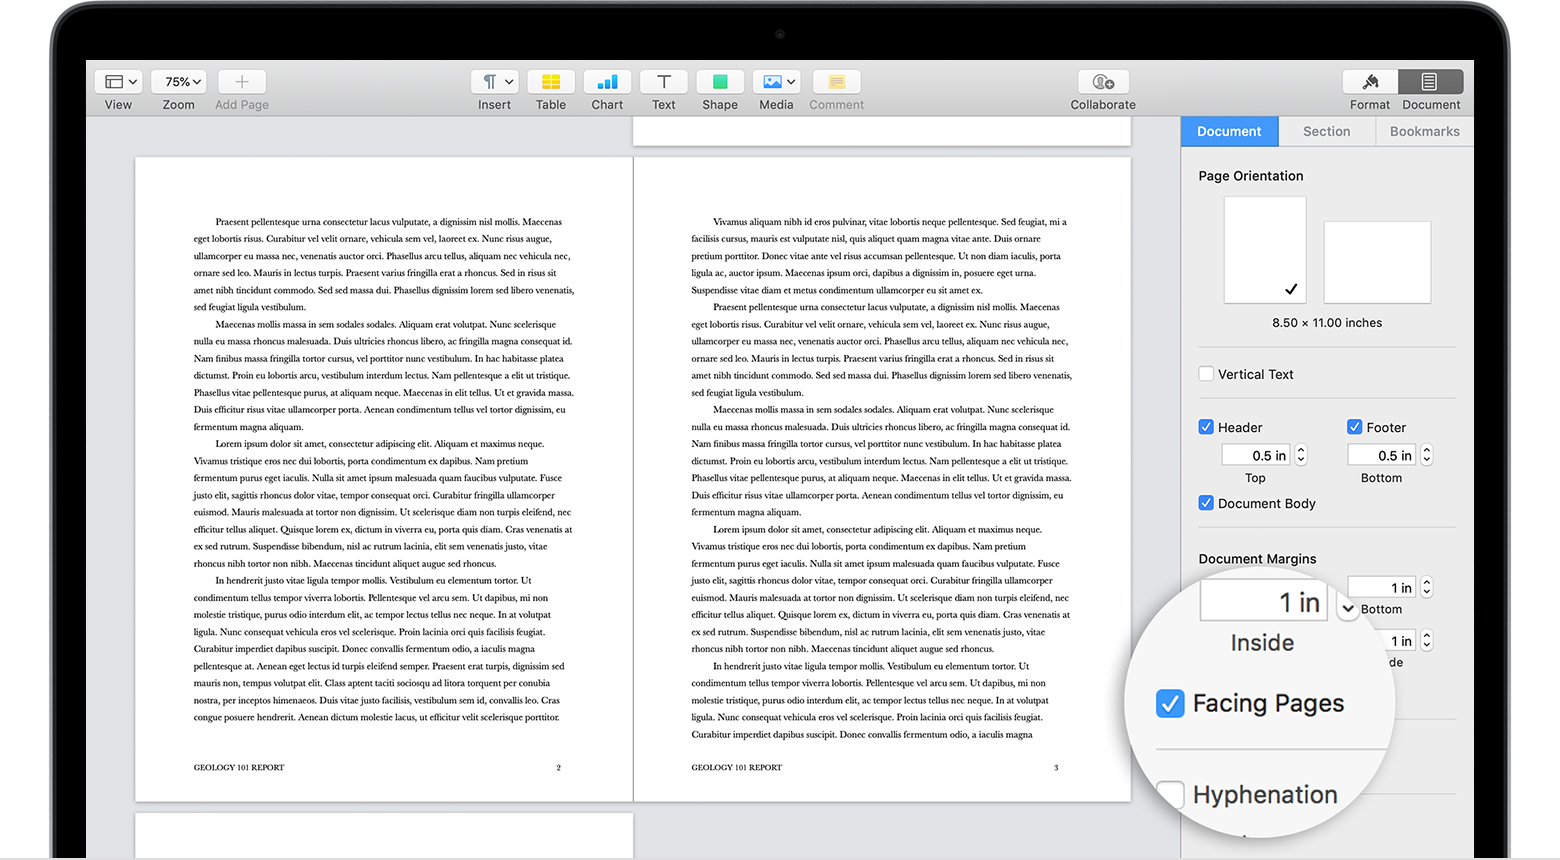 microwoft excel for mac how to adjust page printing